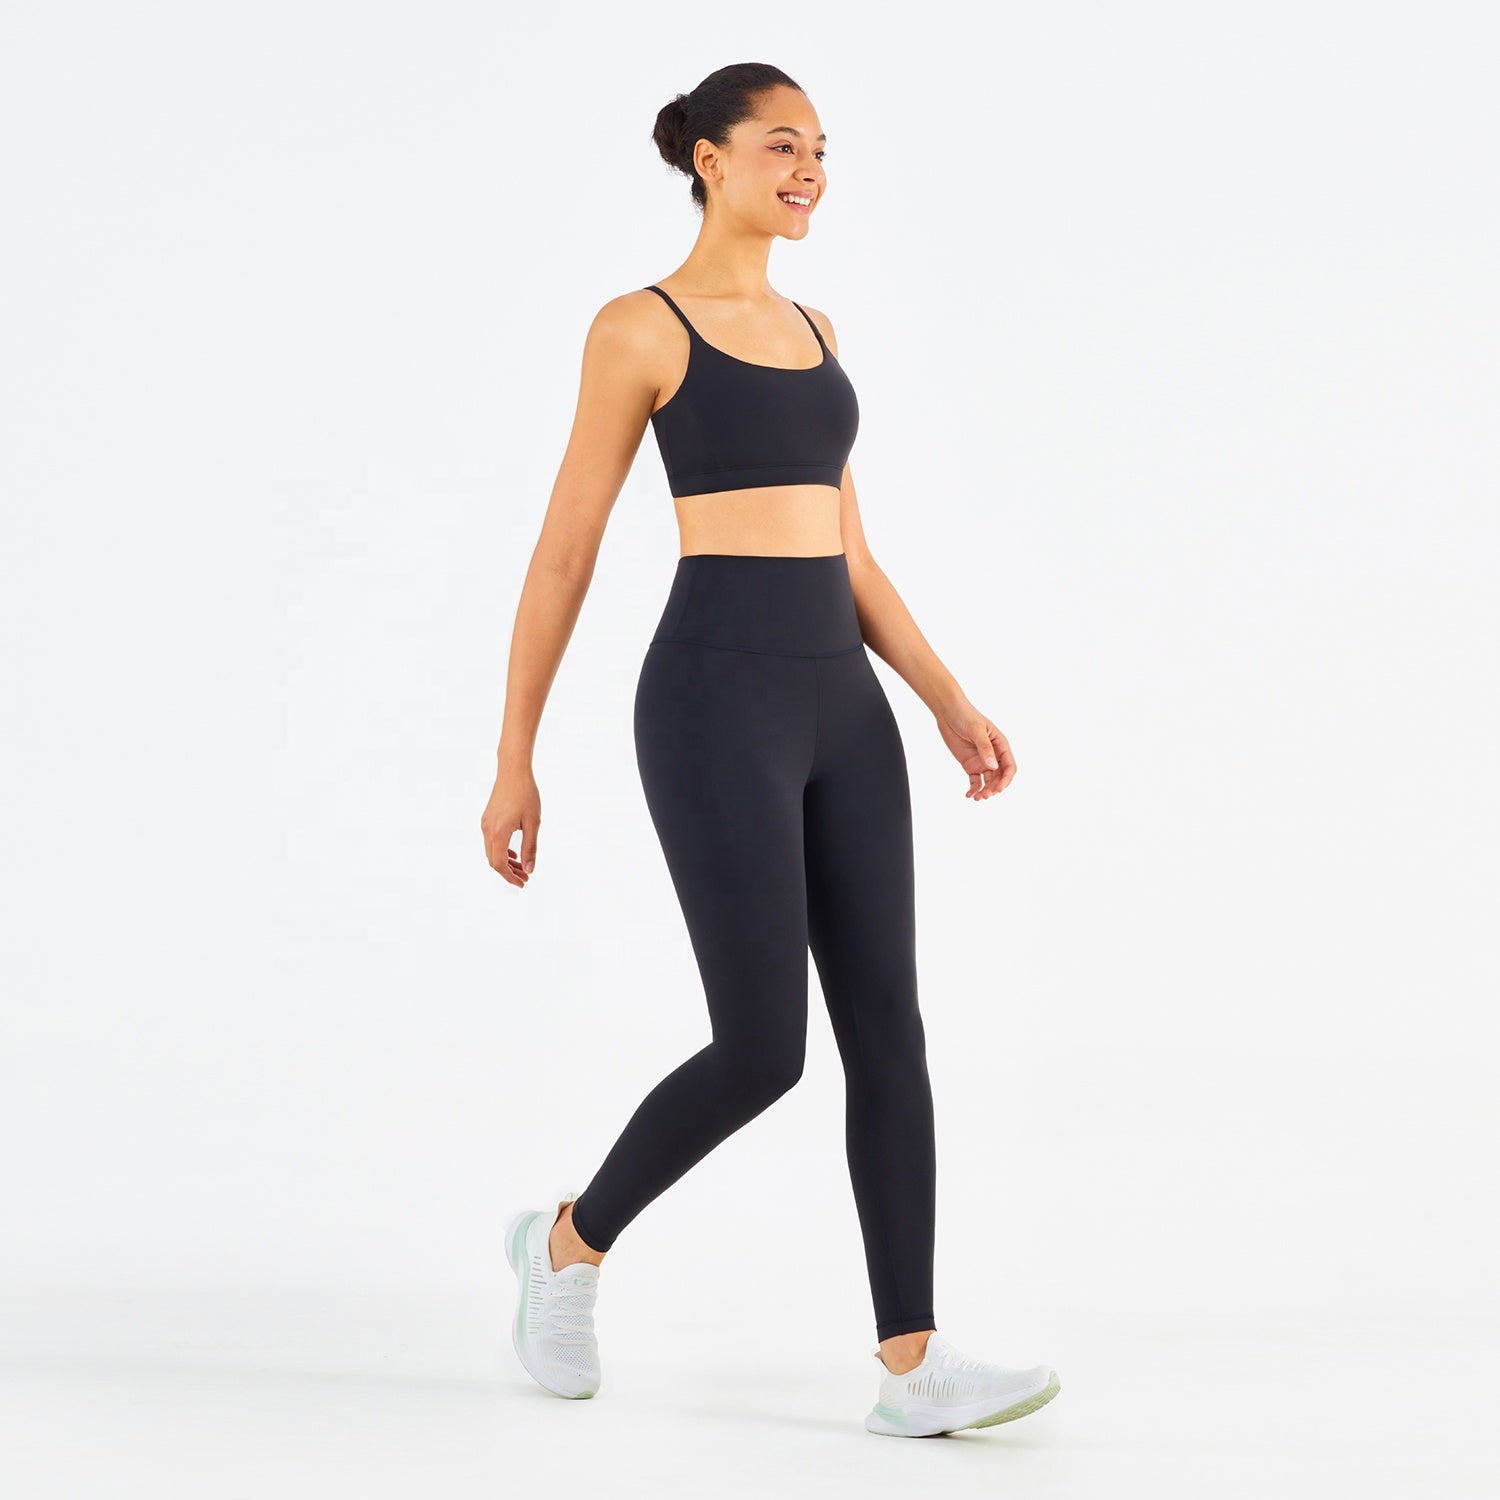 Women Super Soft Sports Gym Leggings High Waist Butt Lift Yoga Pants. This super comfortable legging is made from nylon and spandex breathable materials that are durable, quick-dry and have great stretchable abilities giving you a comfortable and flexible feel. Its suitable for jogging, yoga, gym and is comfortable for leisure wear.